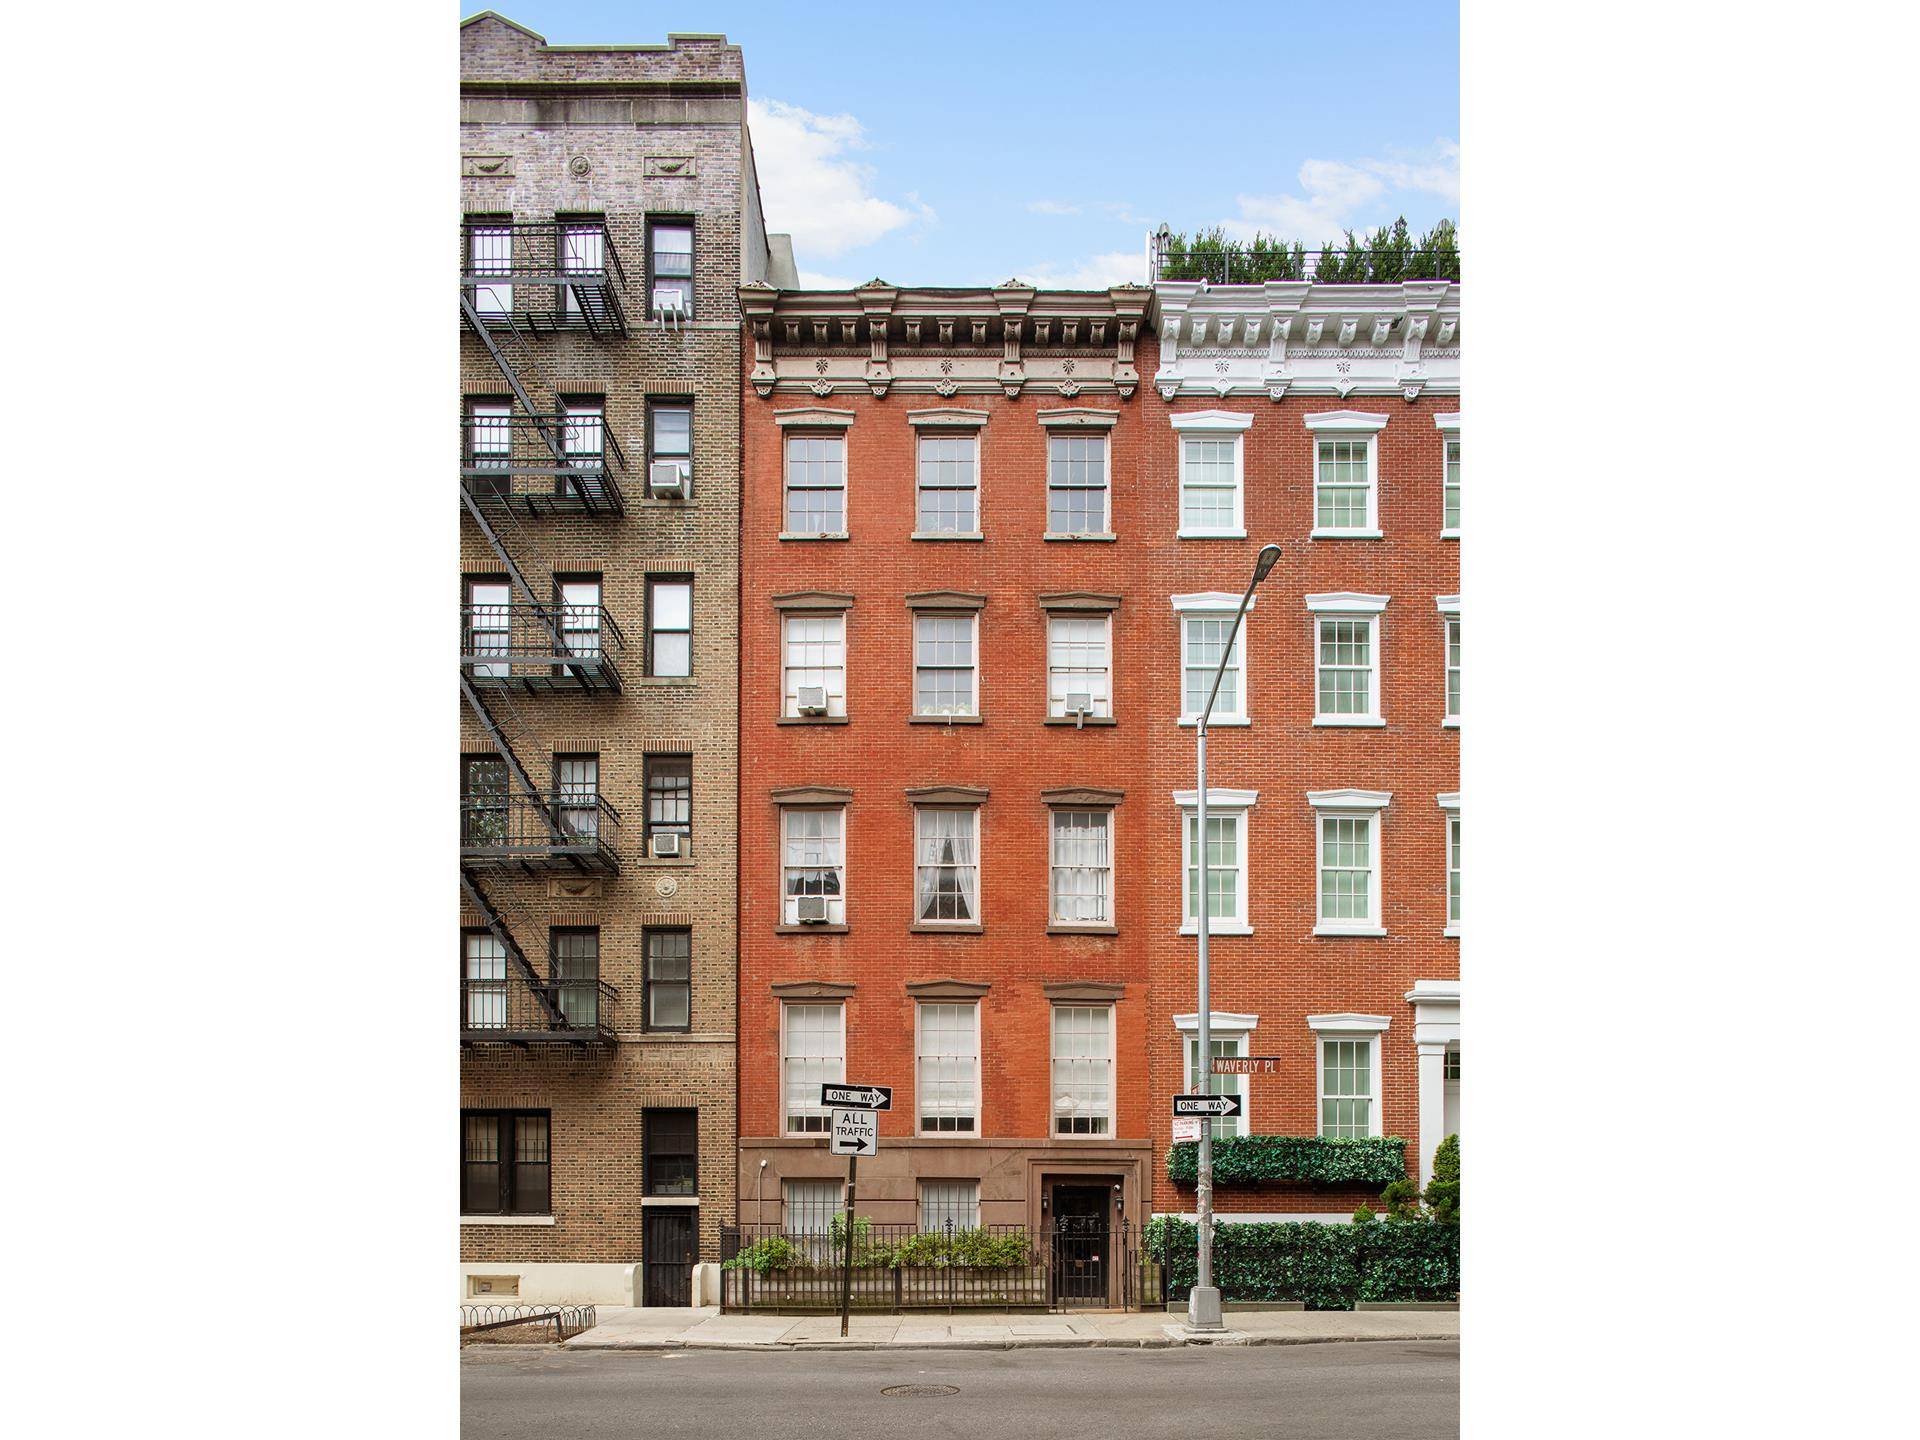 Located on one of the most unique and charming blocks in the heart of Greenwich Village sits this nearly 23' wide, five story townhouse.